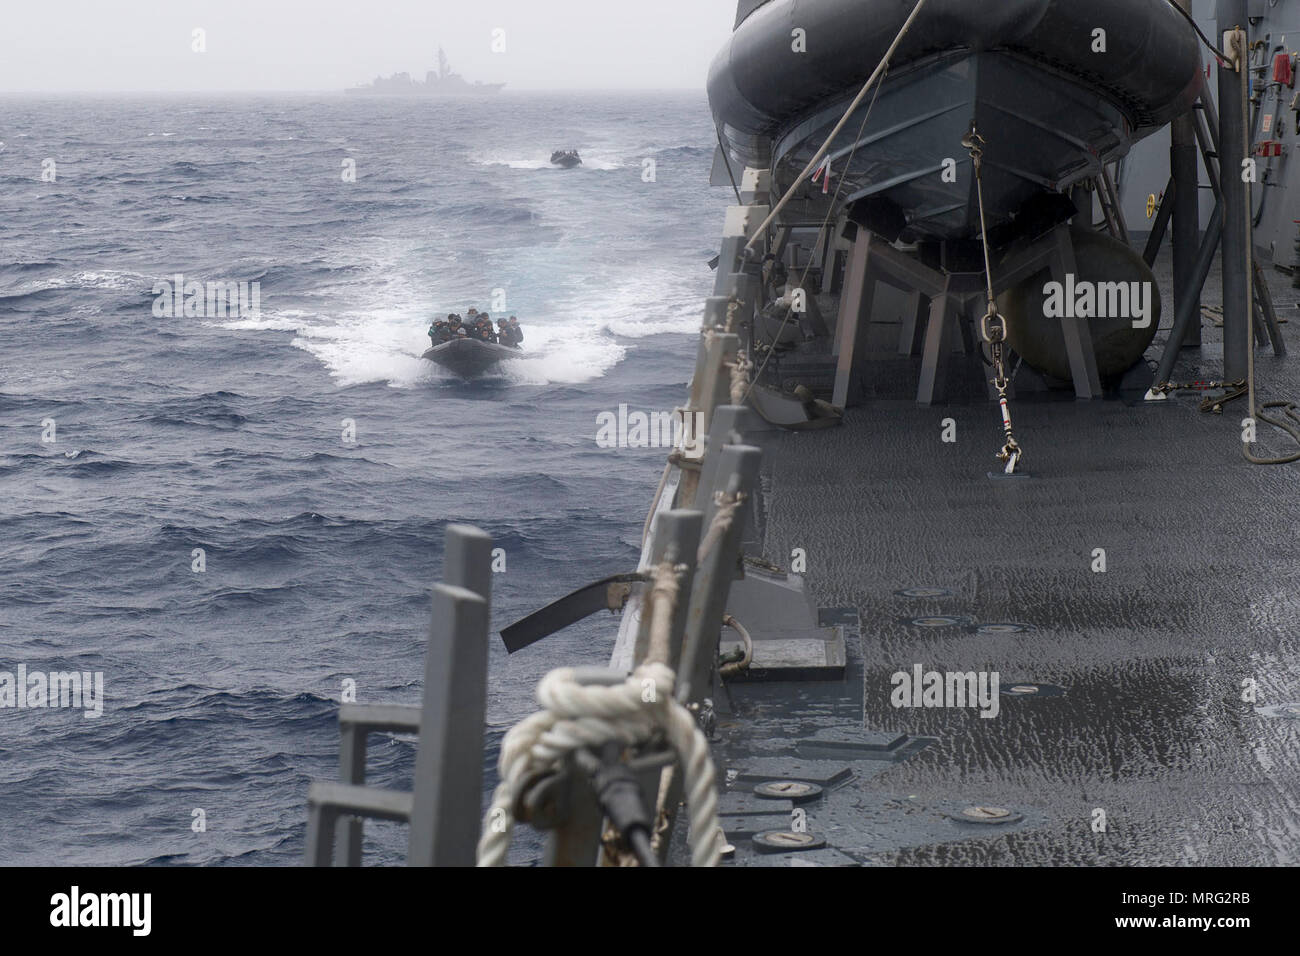 170610-N-ZW825-1204 SOUTH CHINA SEA (June 10, 2017) Rigid-hull inflatable boats from Japan Maritime Self-Defense Force (JMSDF) ship JS Sazanami (DD 113) approach Arleigh Burke-class guided-missile destroyer USS Sterett (DDG 104) as part of a visit, board, search and seizure exercise. Sterett, Sazanami, JMSDF ship JS Izumo (DDH 183), Royal Canadian Navy ship HMCS Winnipeg (338) and Royal Australian Navy ship HMAS Ballarat (FFH 155) conducted a series of maritime operations together in the South China Sea. Sterett is part of the Sterett-Dewey Surface Action Group and is the third deploying group Stock Photo